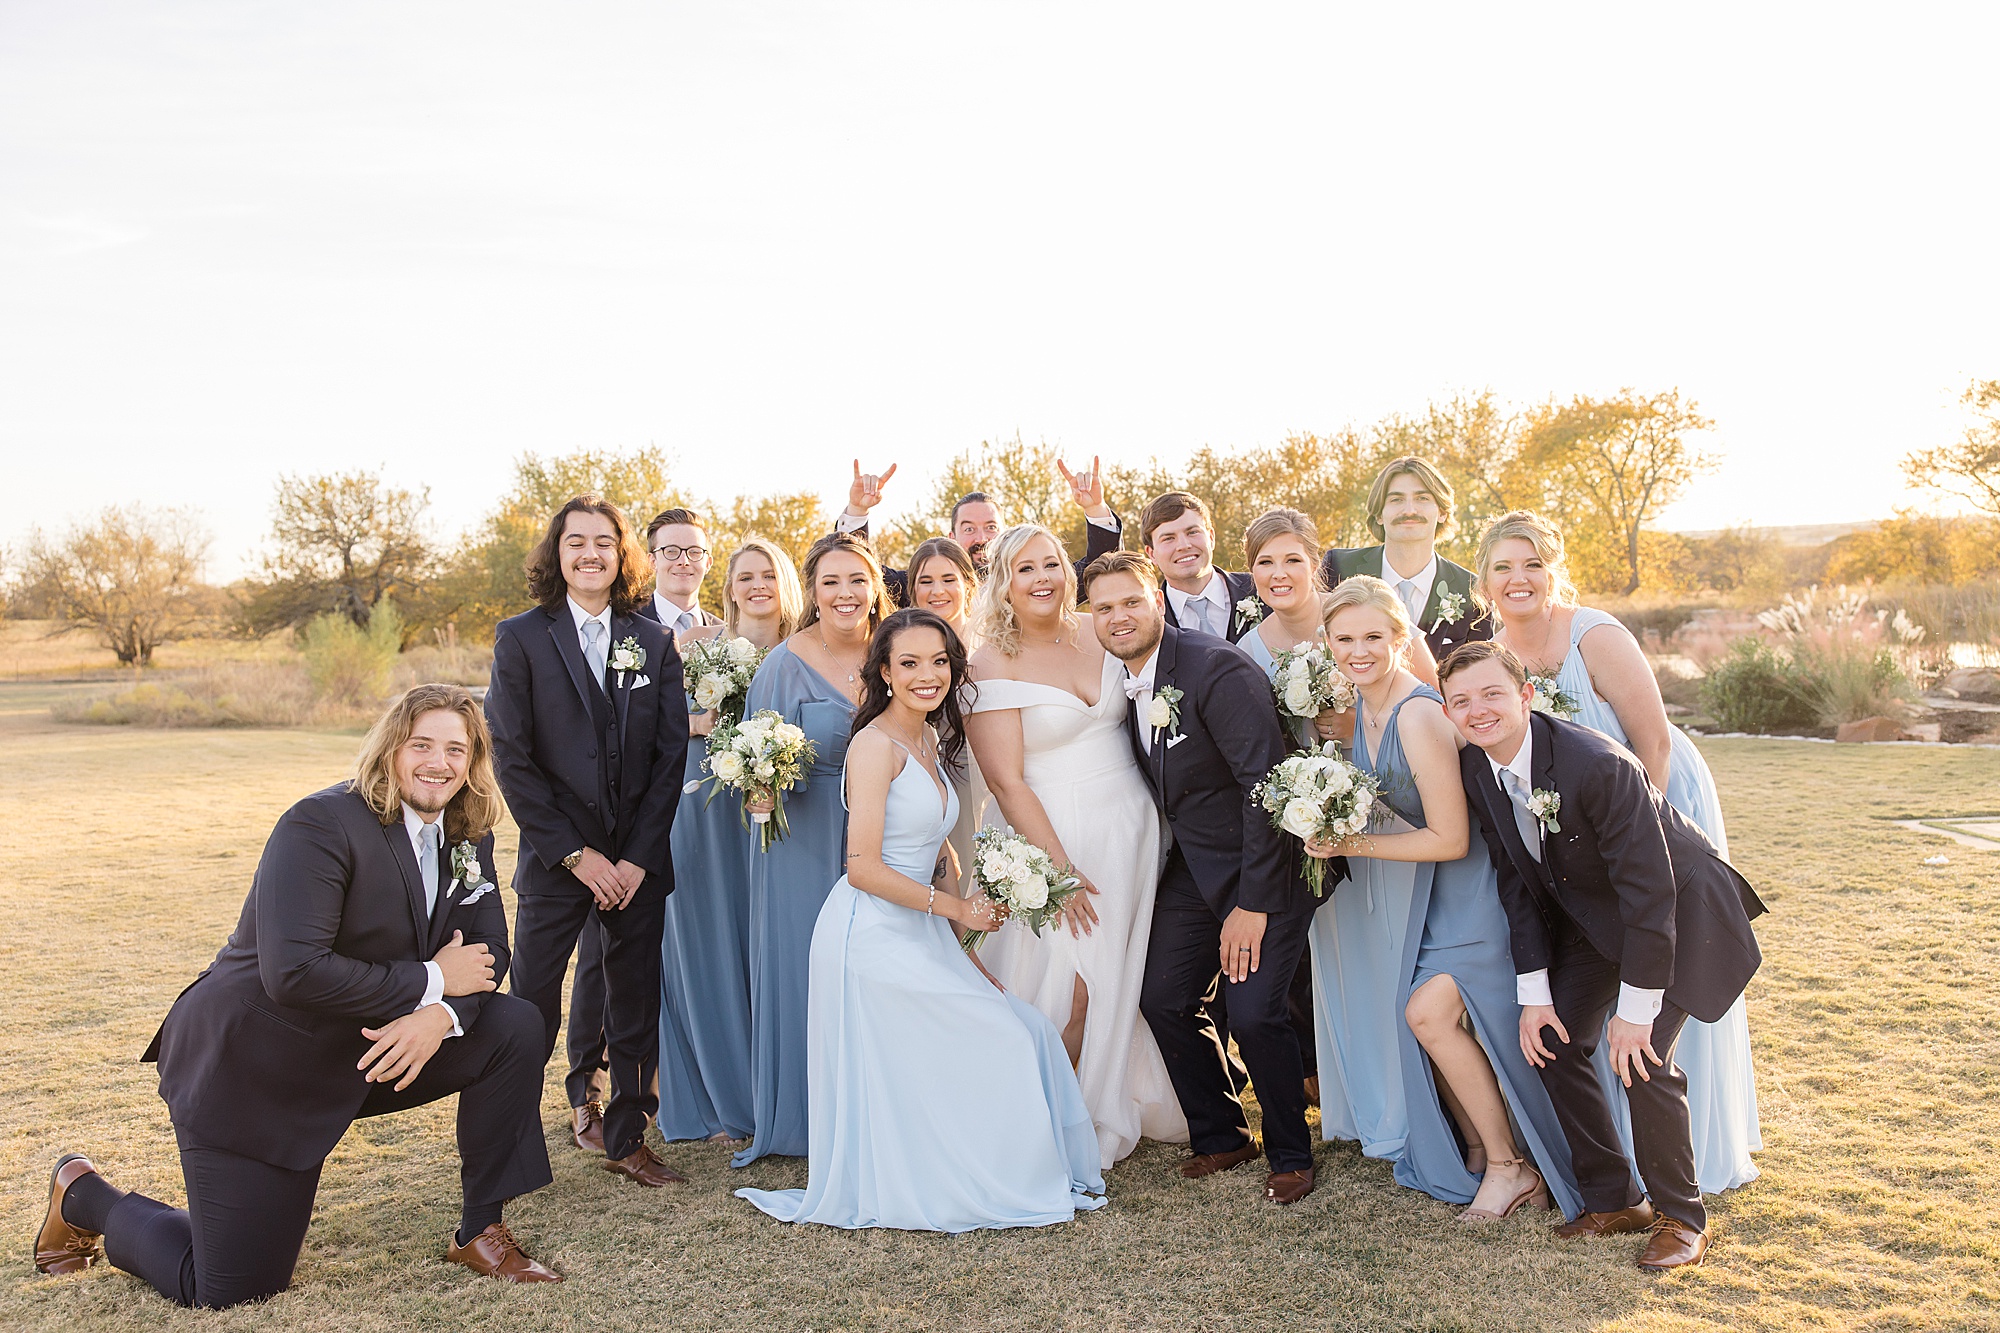 newlyweds pose with wedding party in light blue gowns and suits